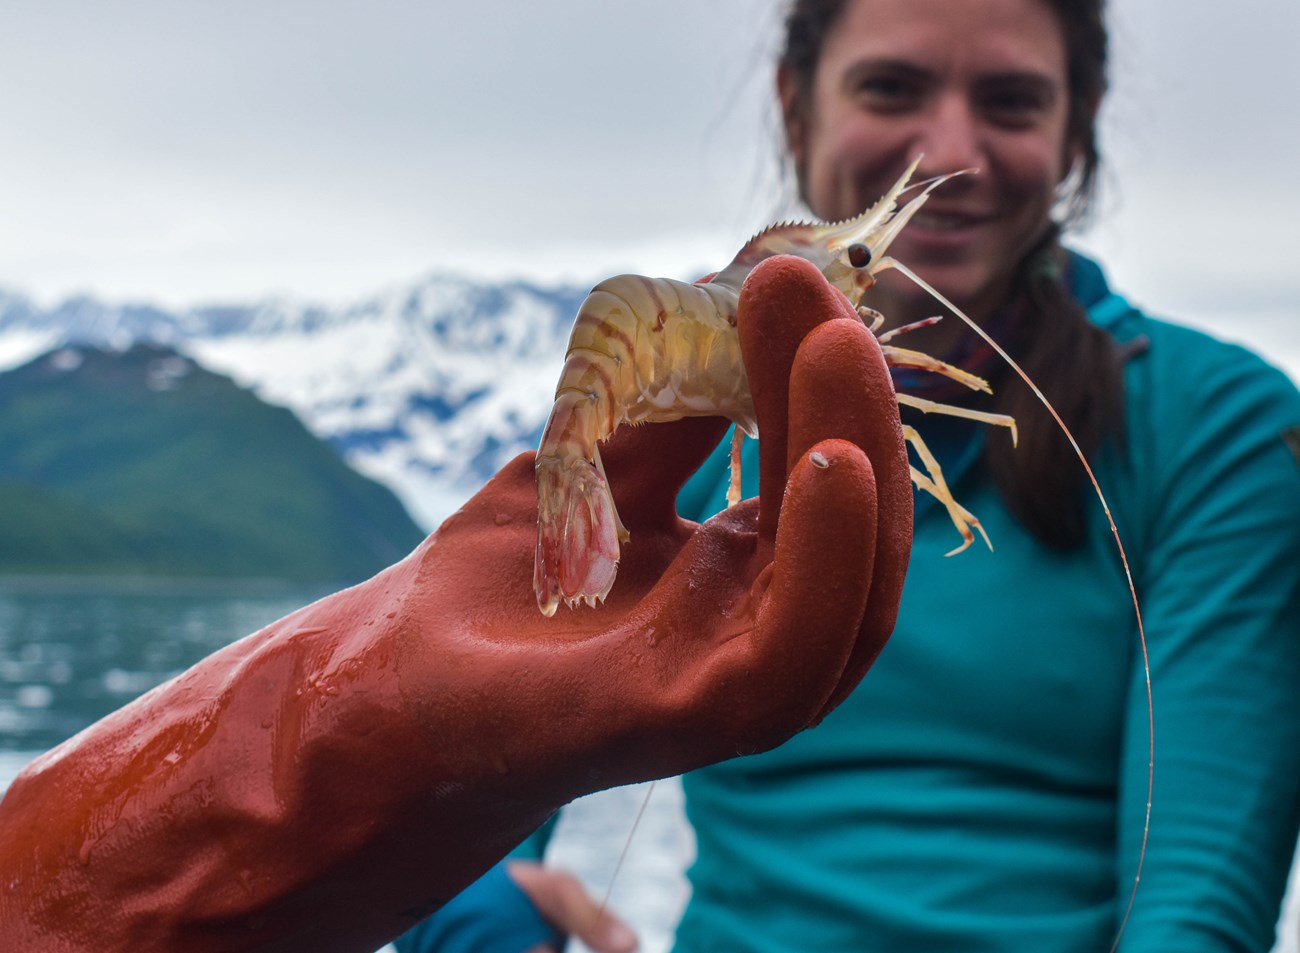 An orange gloved hand holds up a shrimp-like organism in front of a person on a boat.